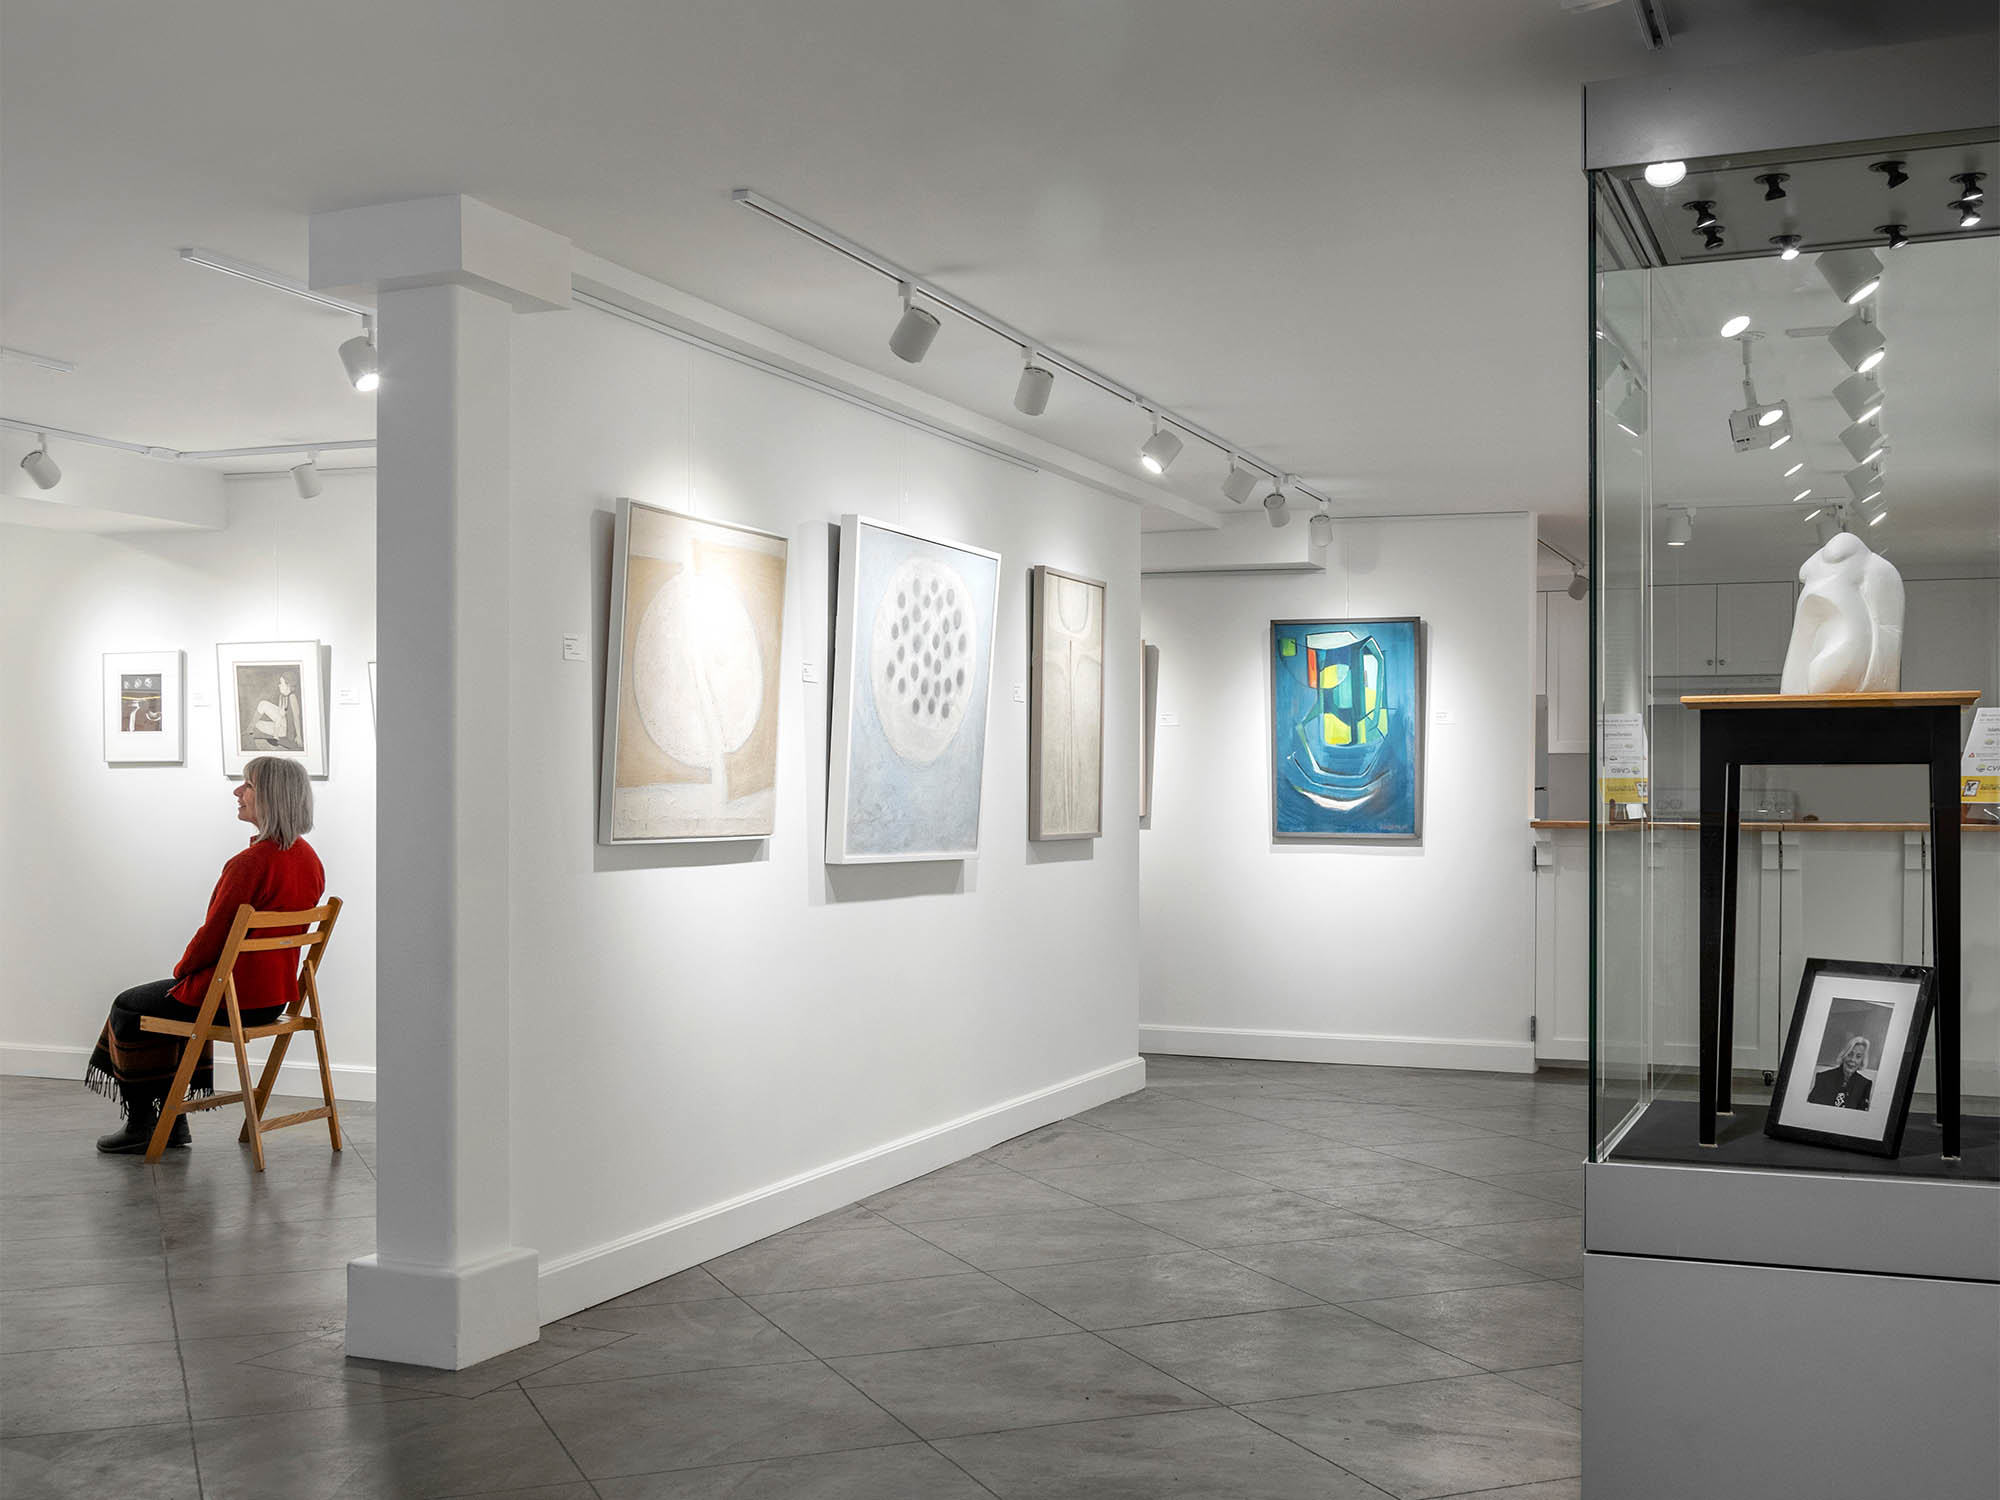 A woman sits in a bright art gallery, professional interior design photography.